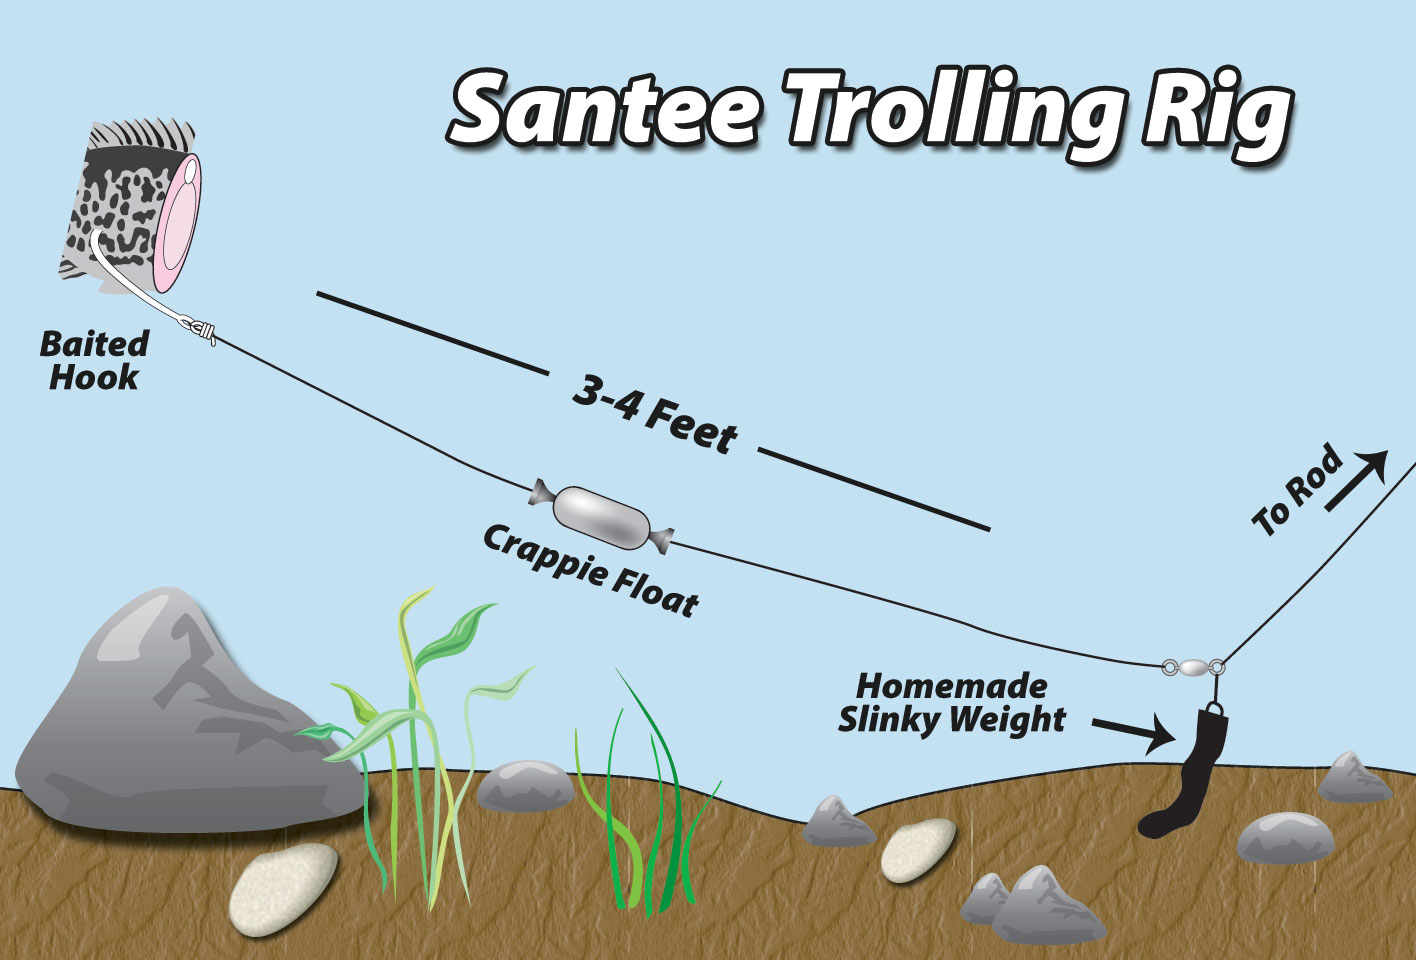 Make your own Santee Cooper rig